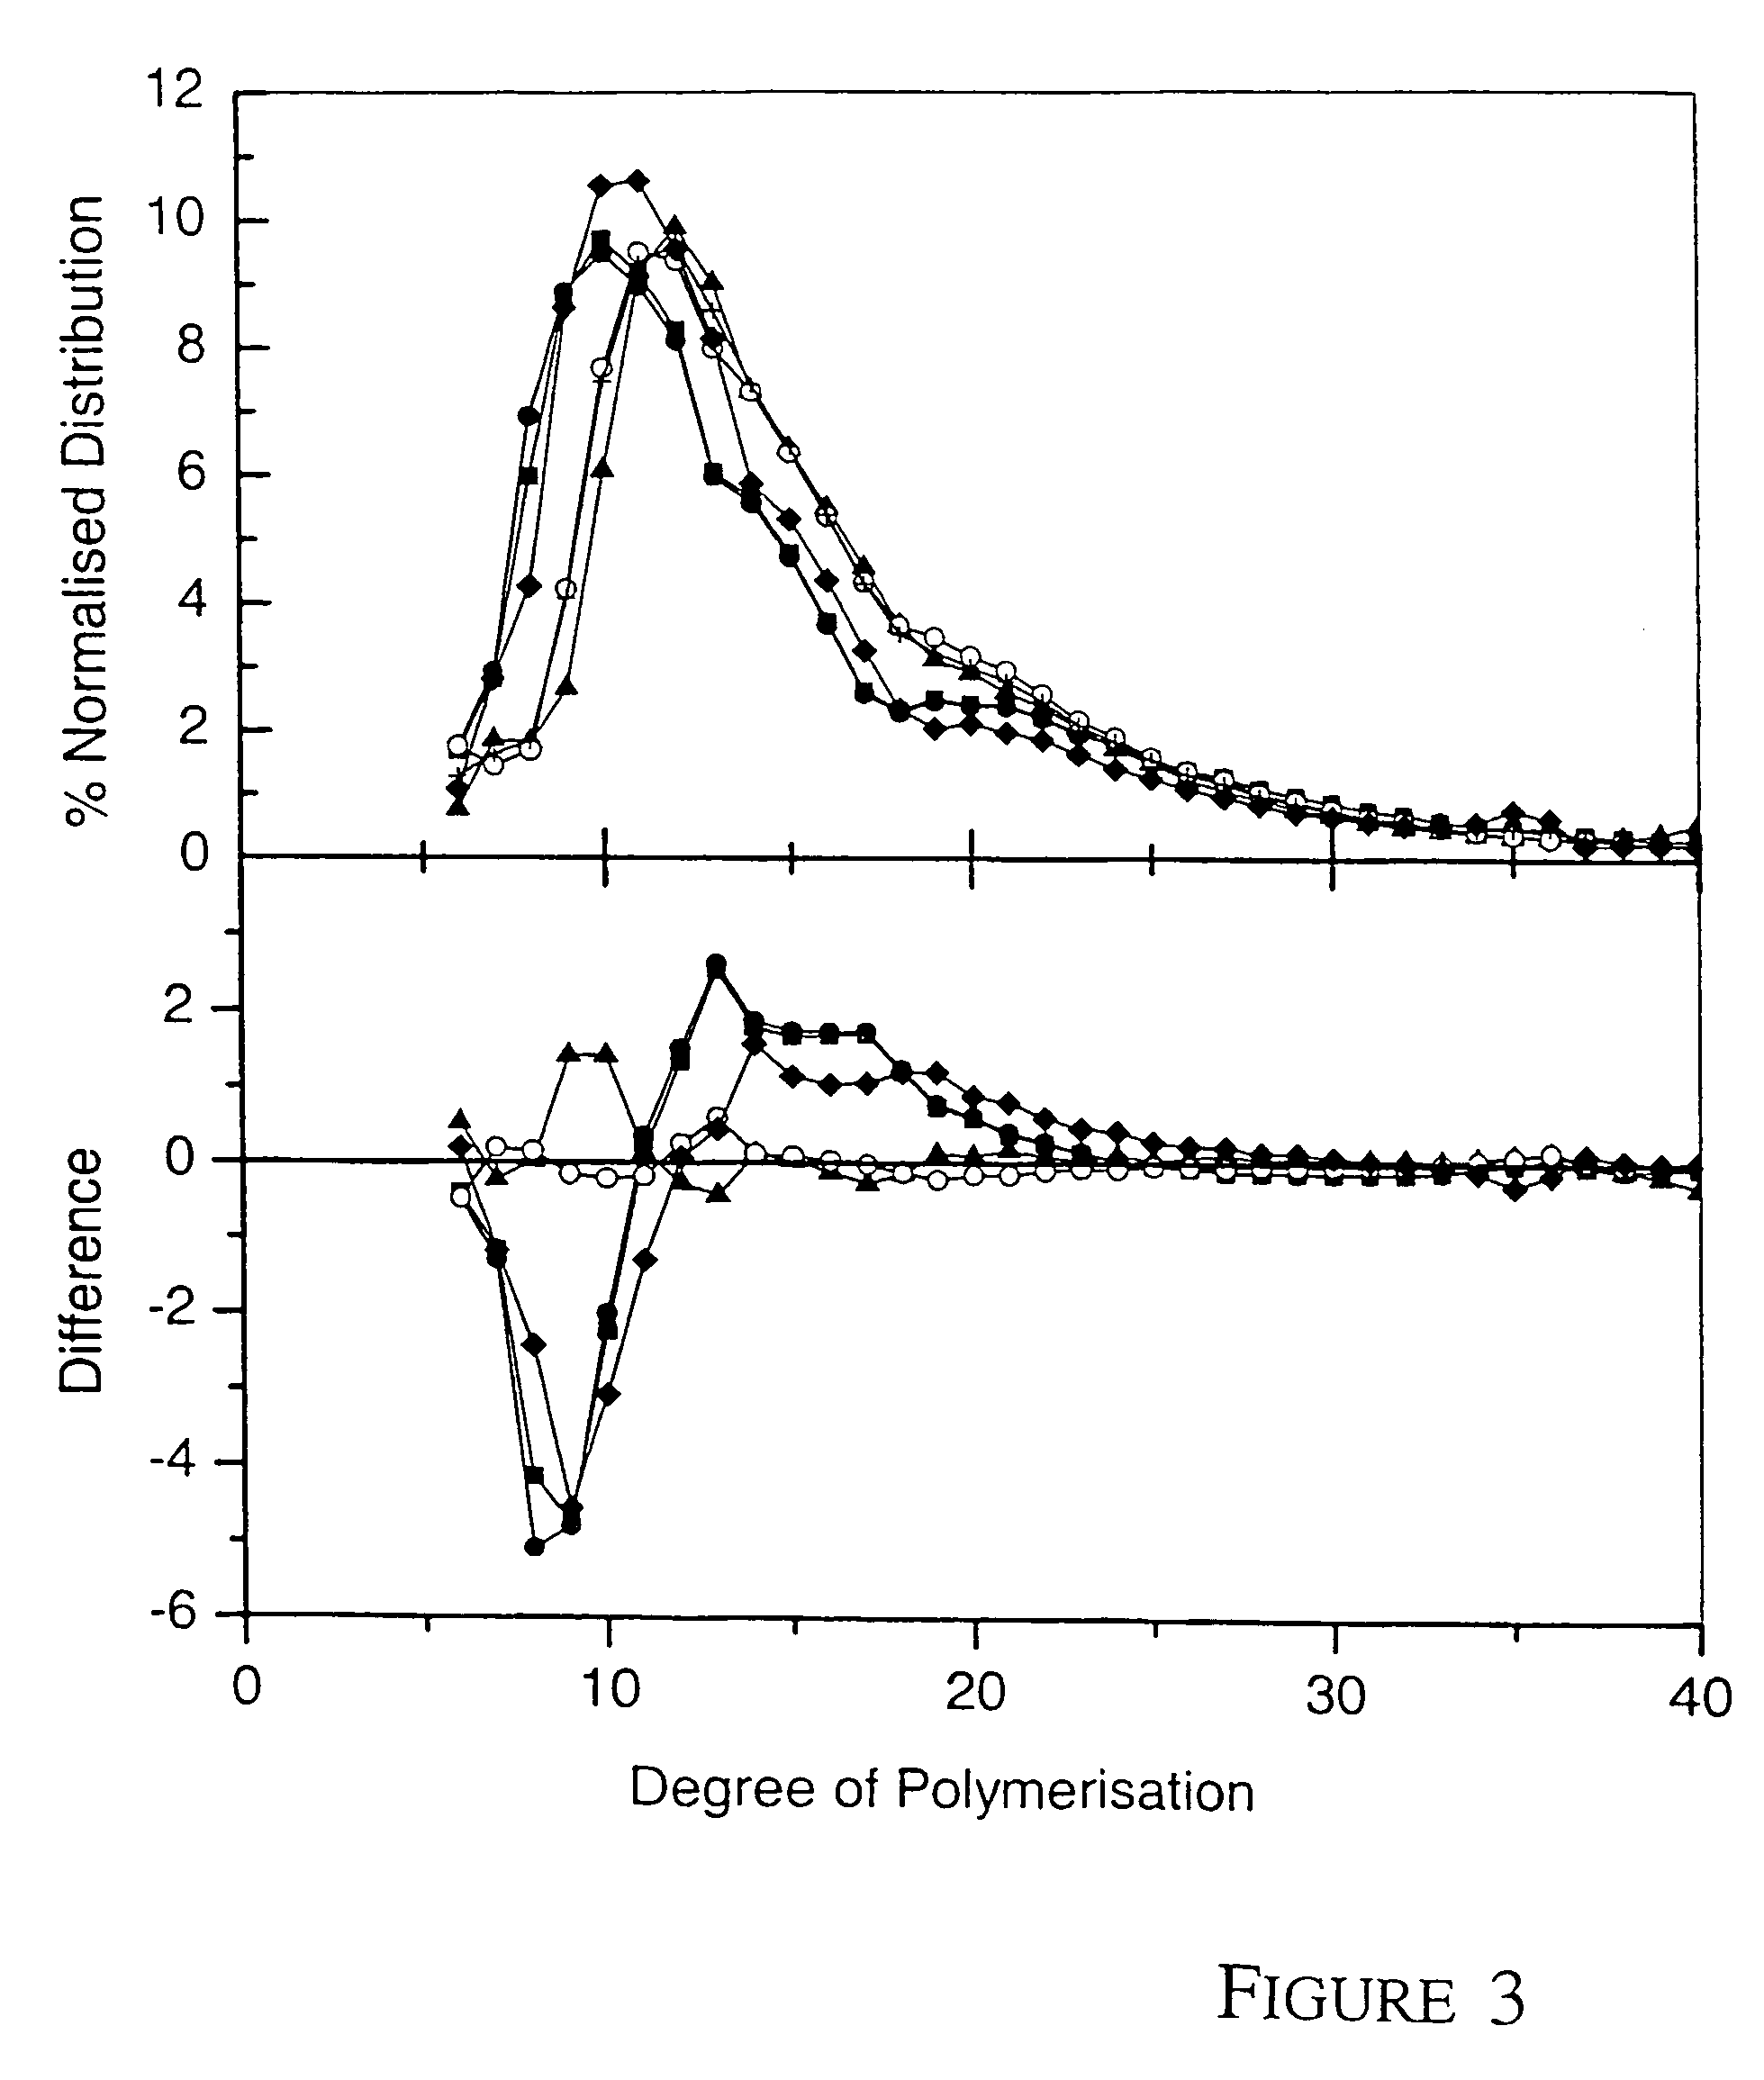 Barley with reduced SSII activity and starch containing products with a reduced amylopectin content